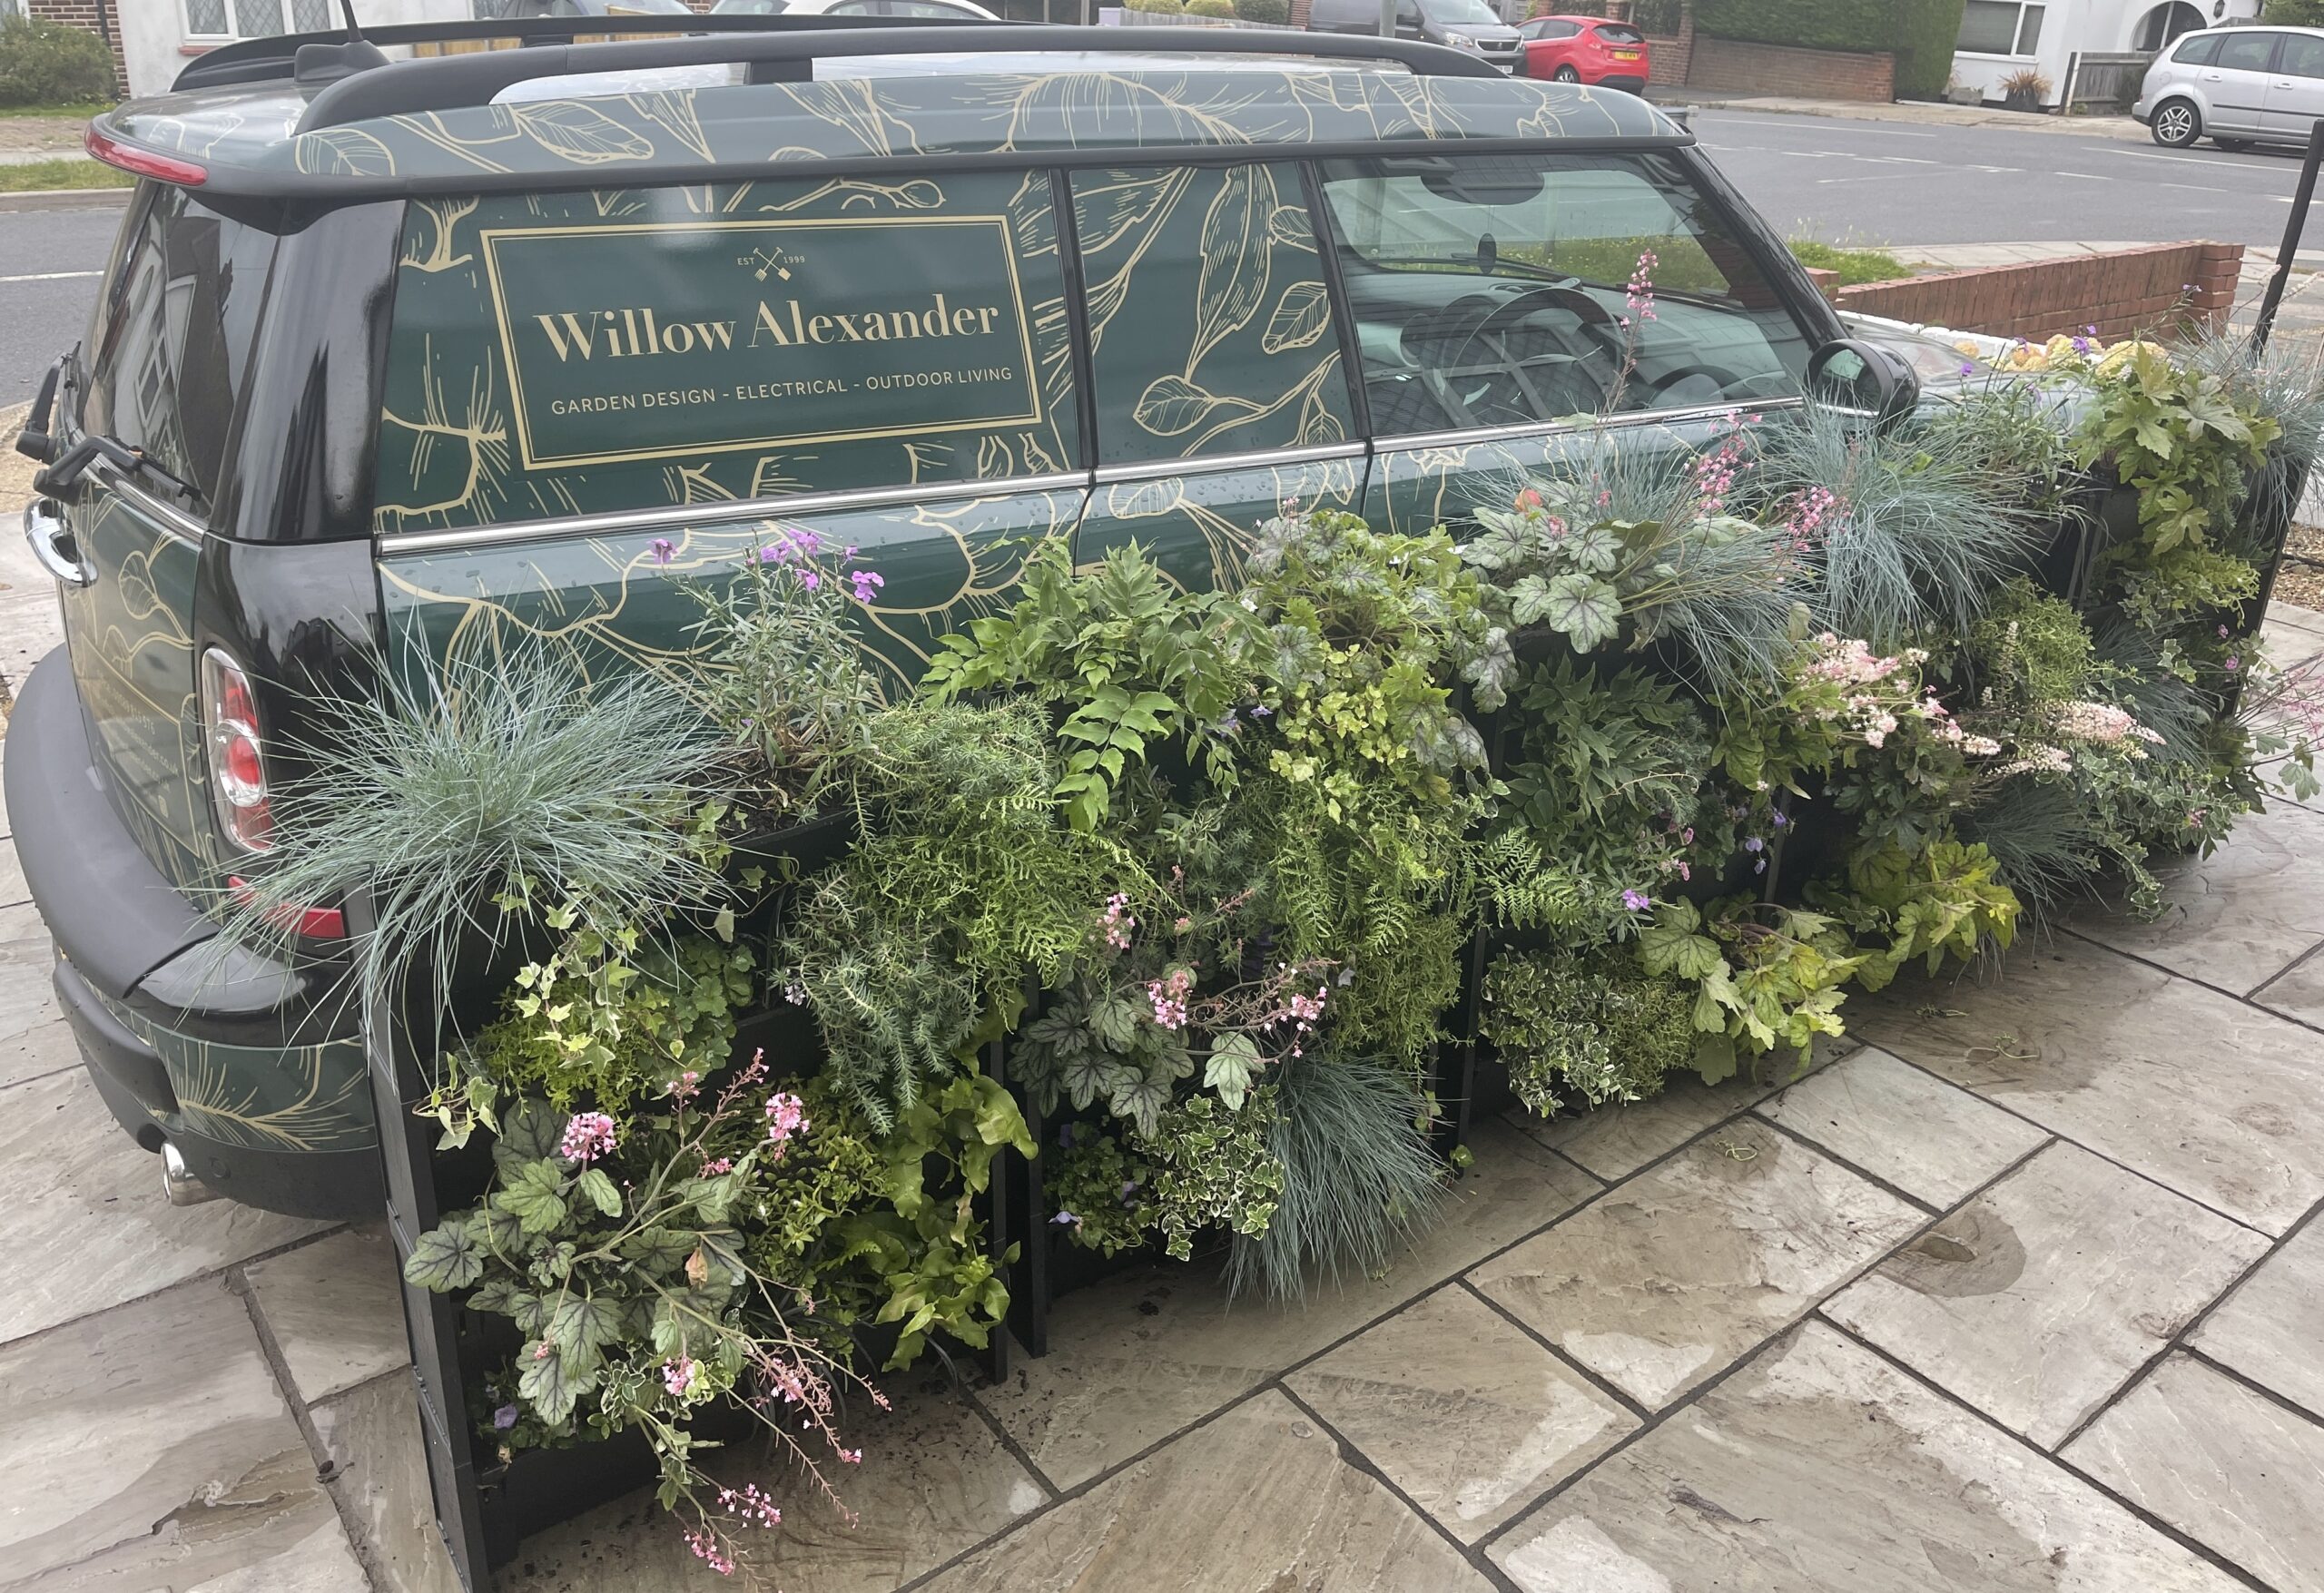 A PlantBox Garden in front of a Willow Alexander Gardens vehicle